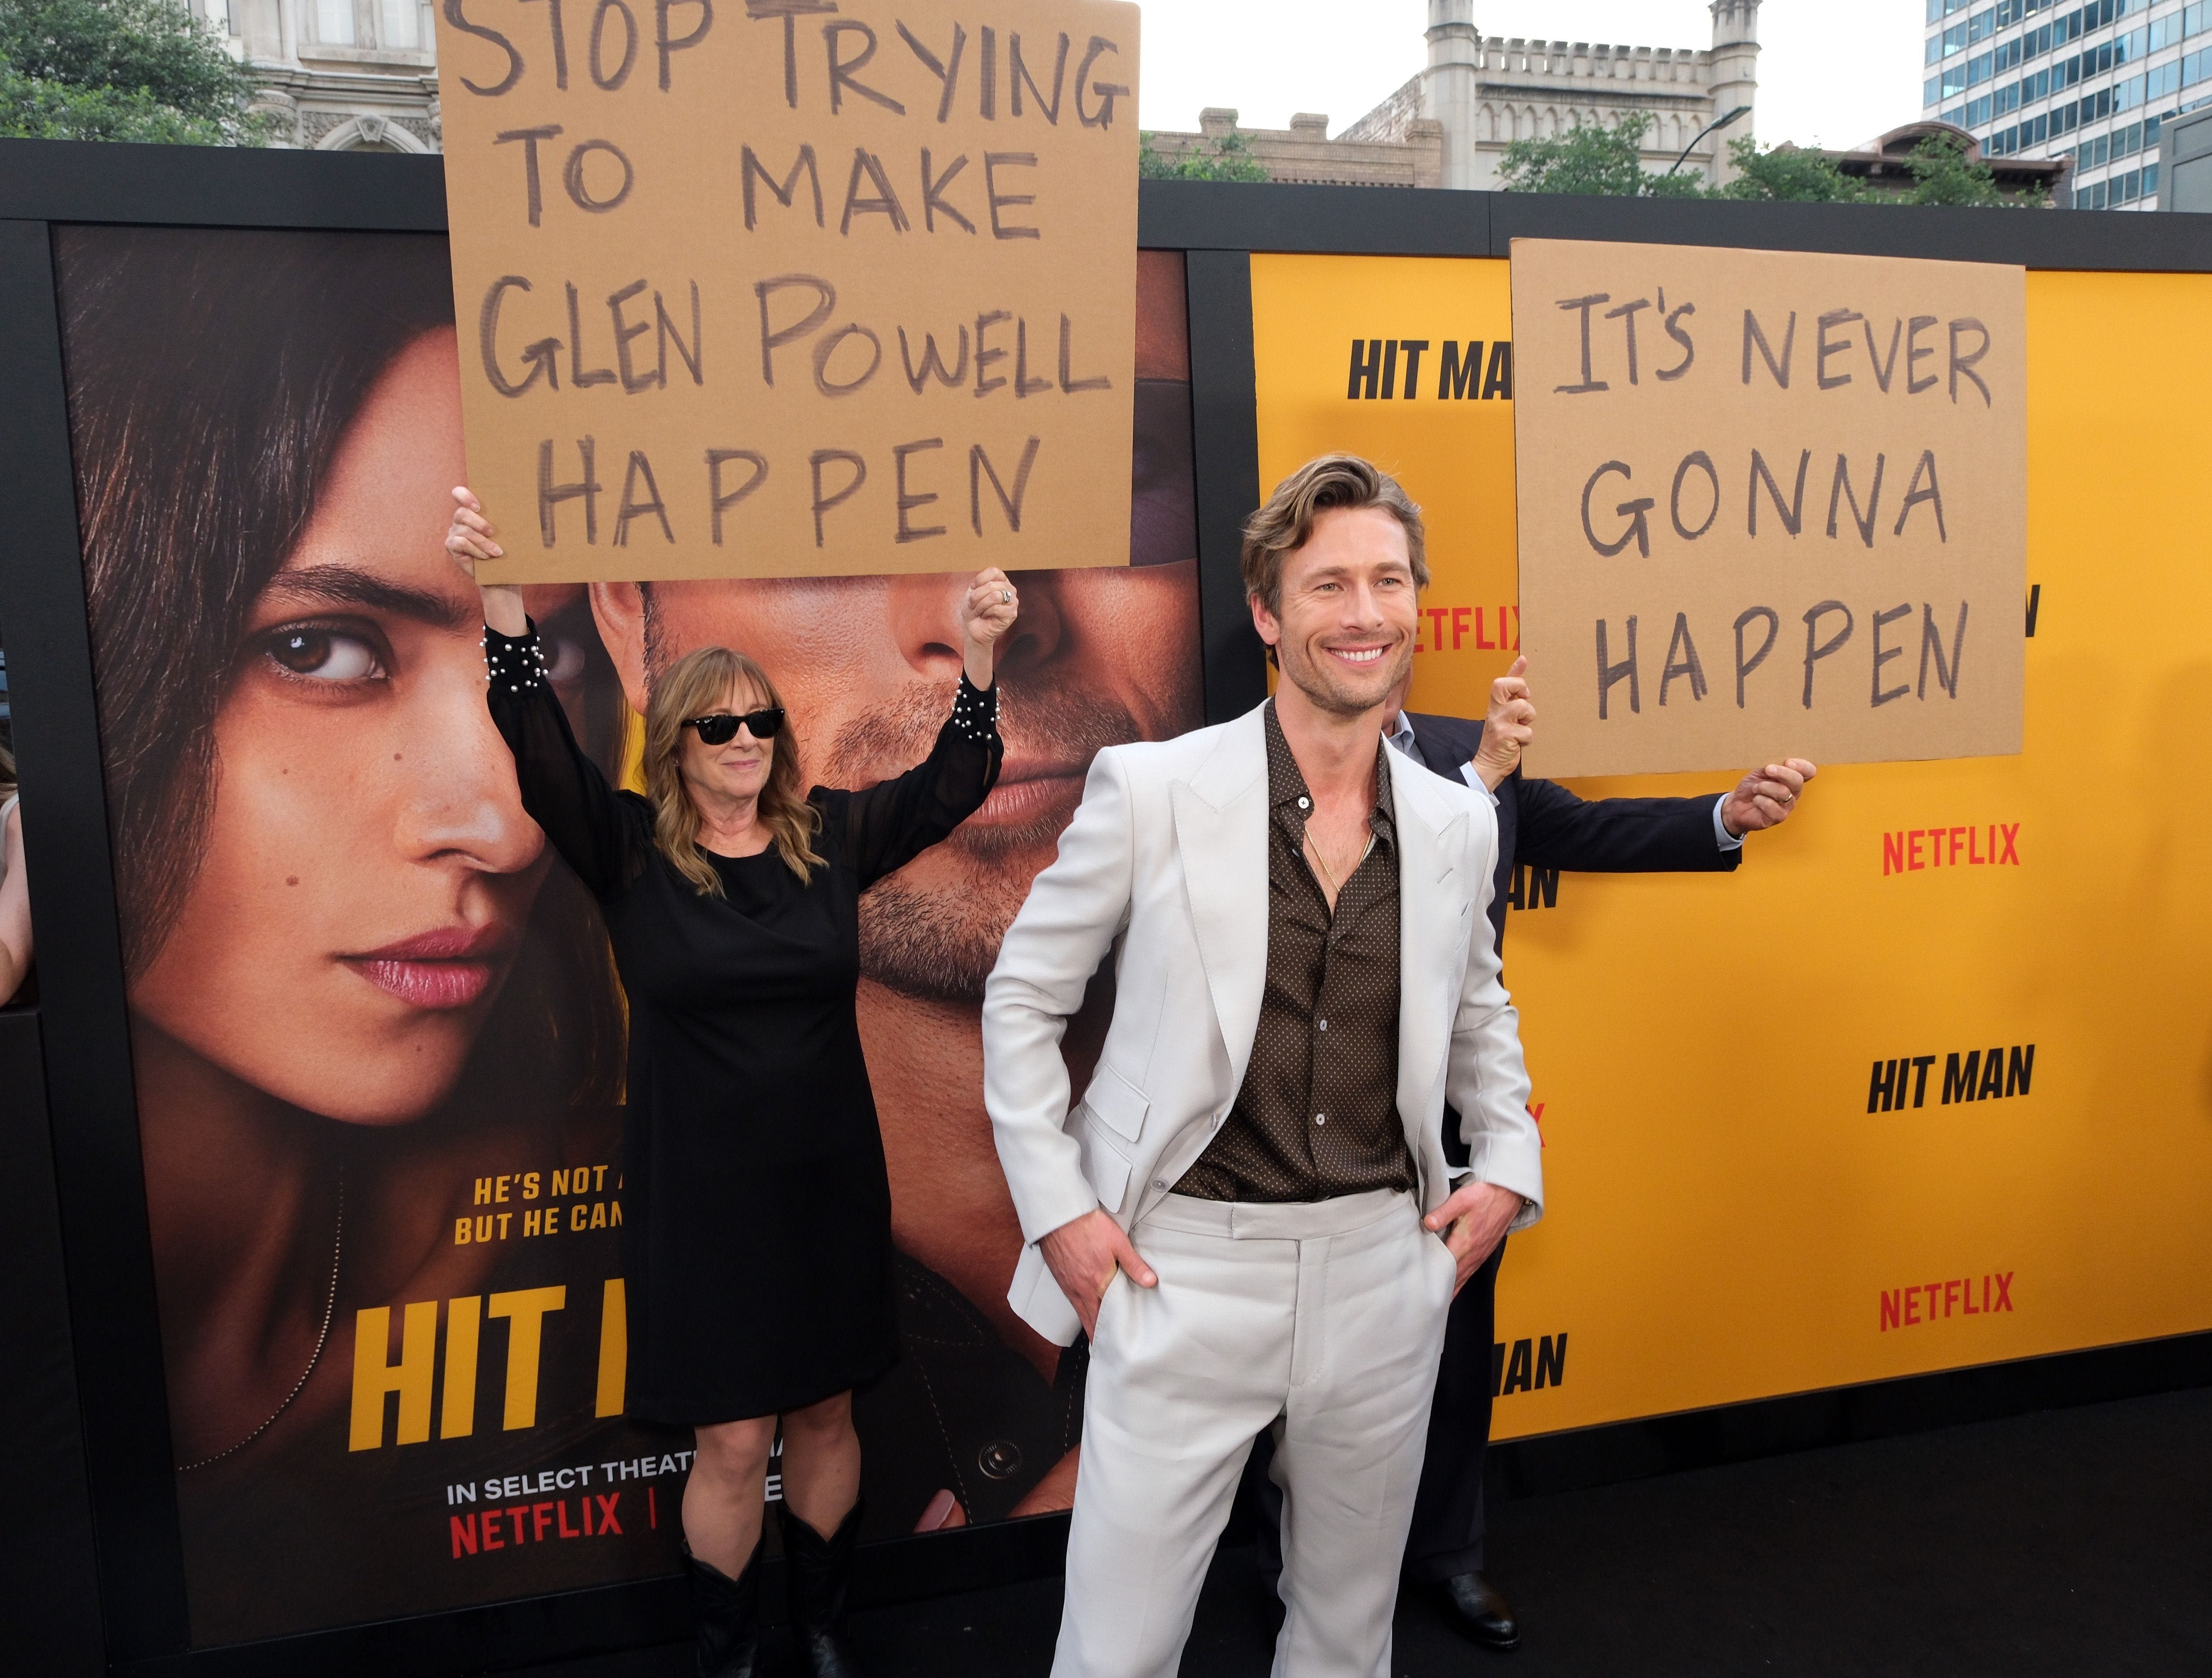 Glen Powell trolled by his parents at 'Hit Man' premiere: 'Stop trying to make Glen Powell happen'